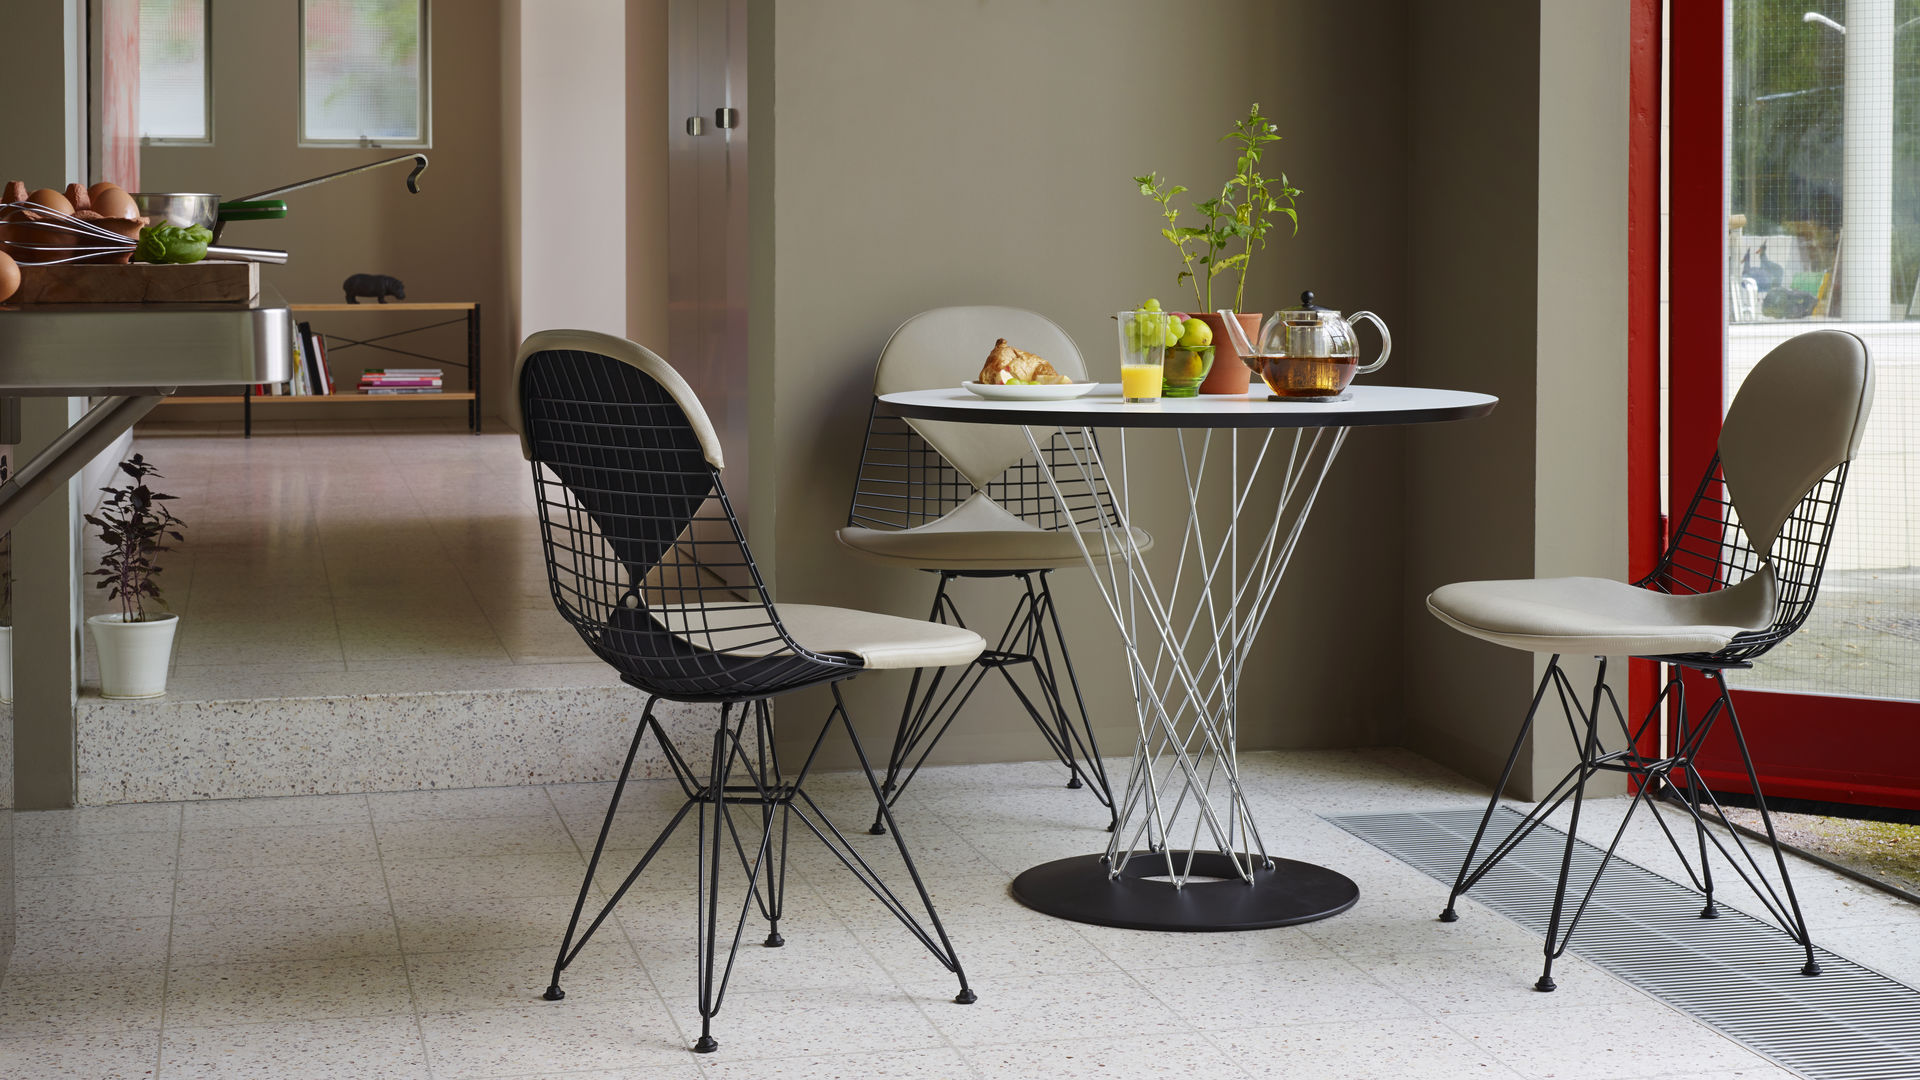 Vitra DKR-2 Chairs and Noguchi Dining Table